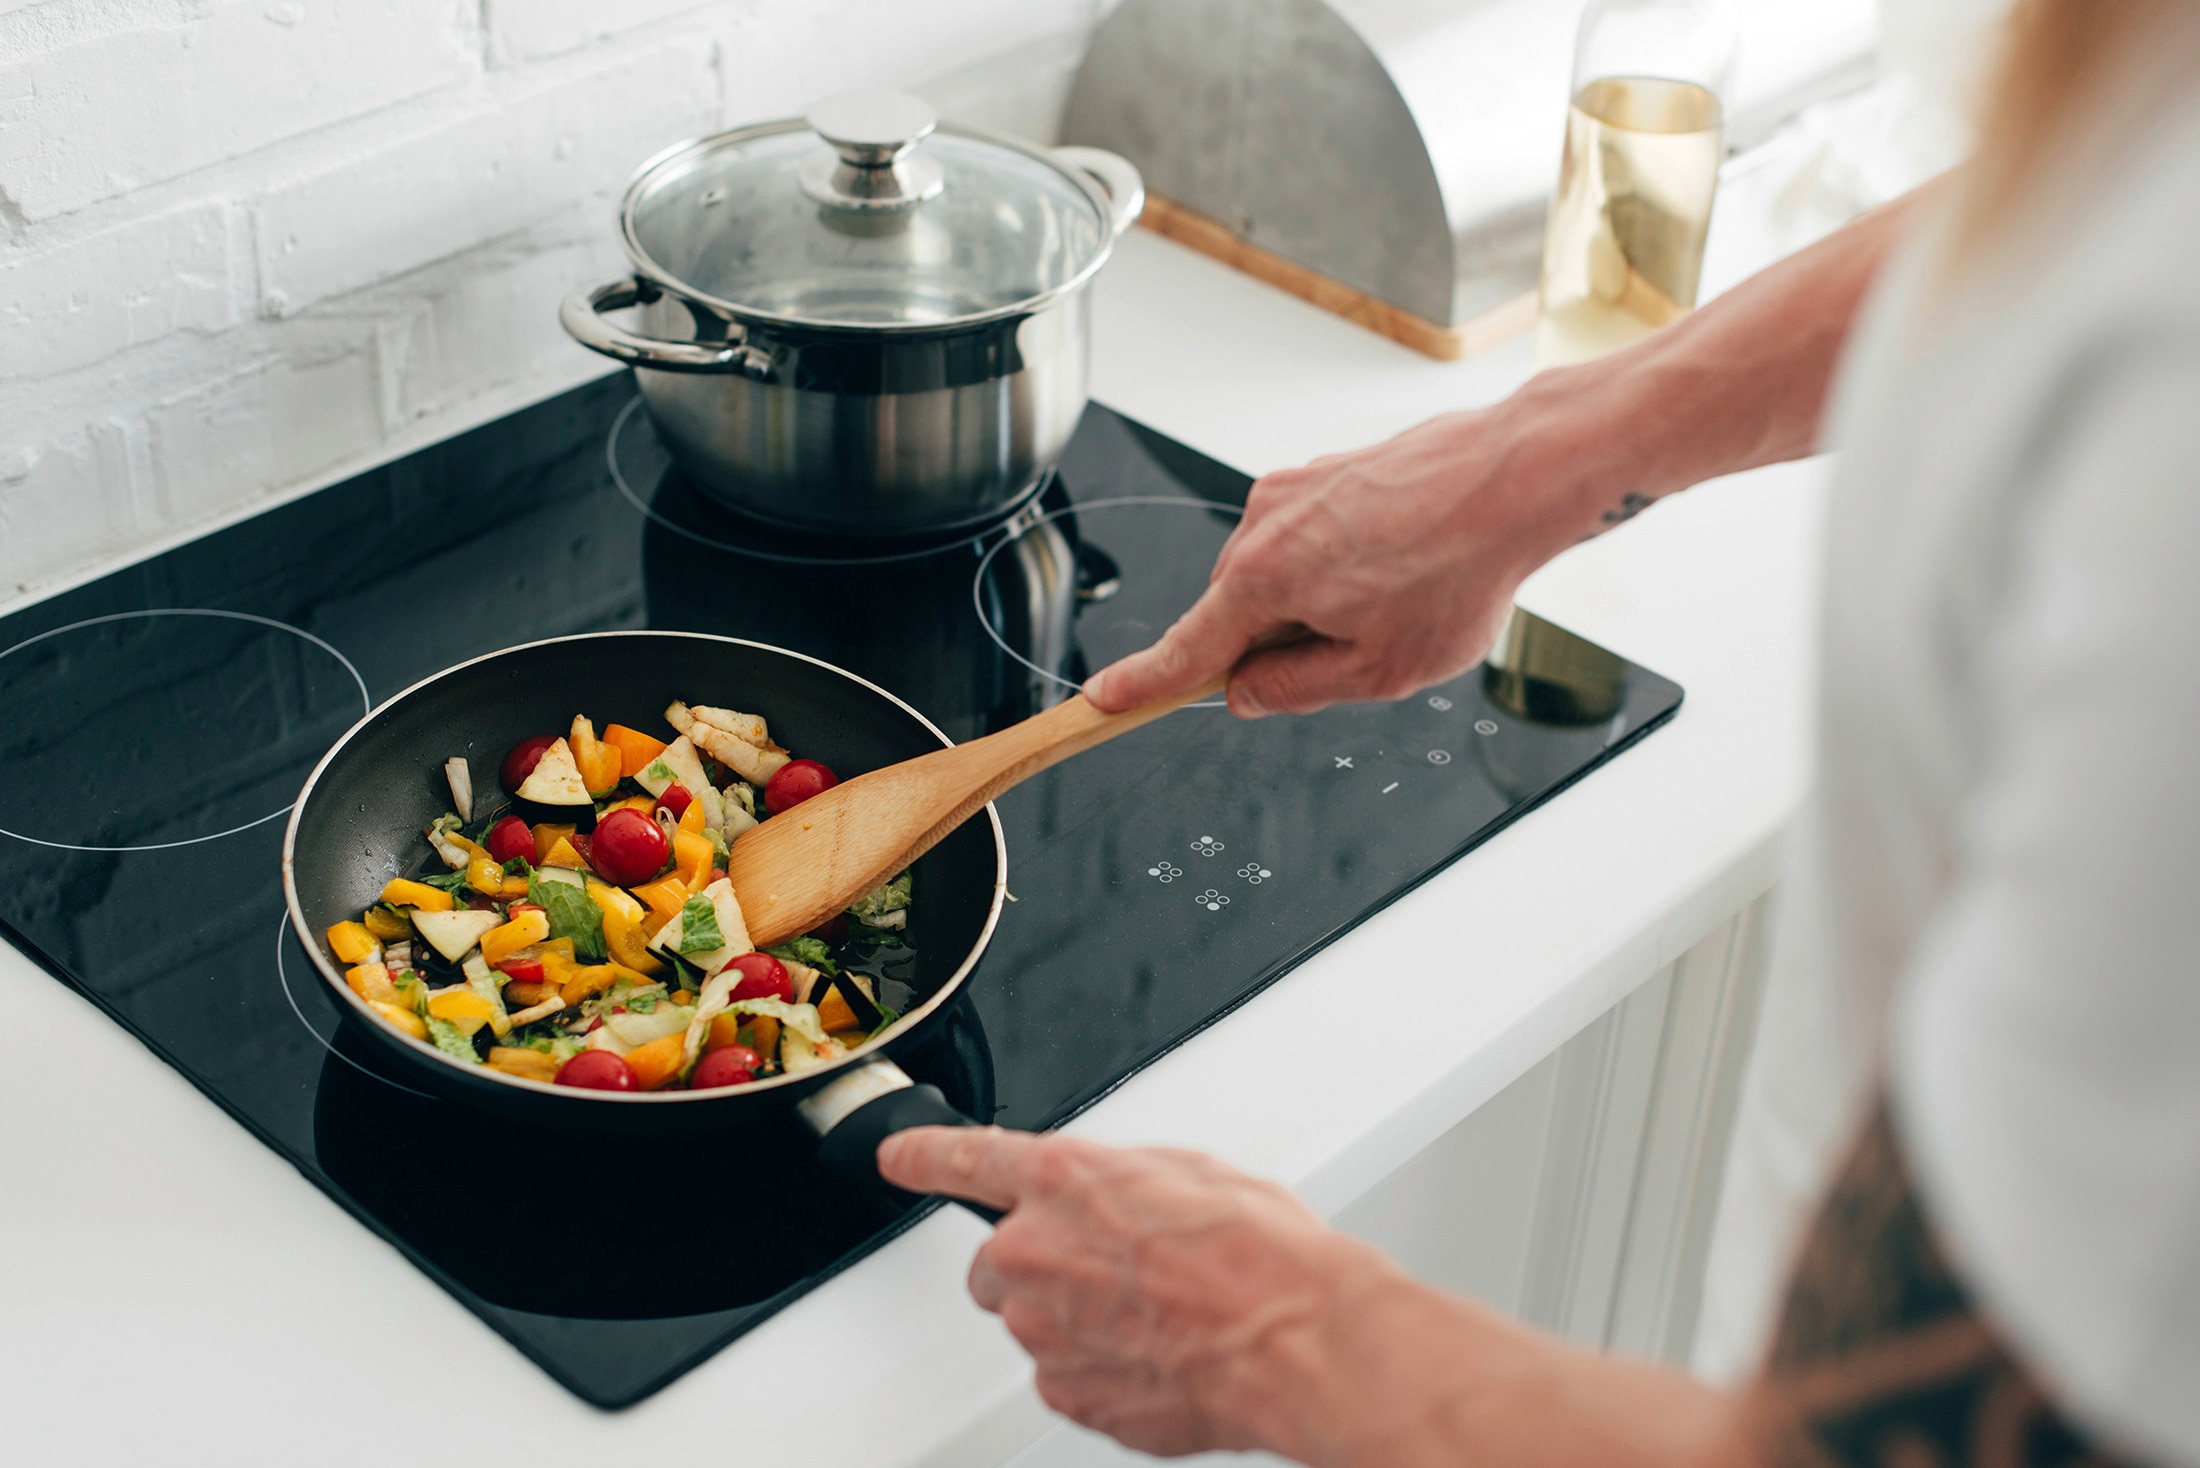 A home cook frying vegetables in a pan